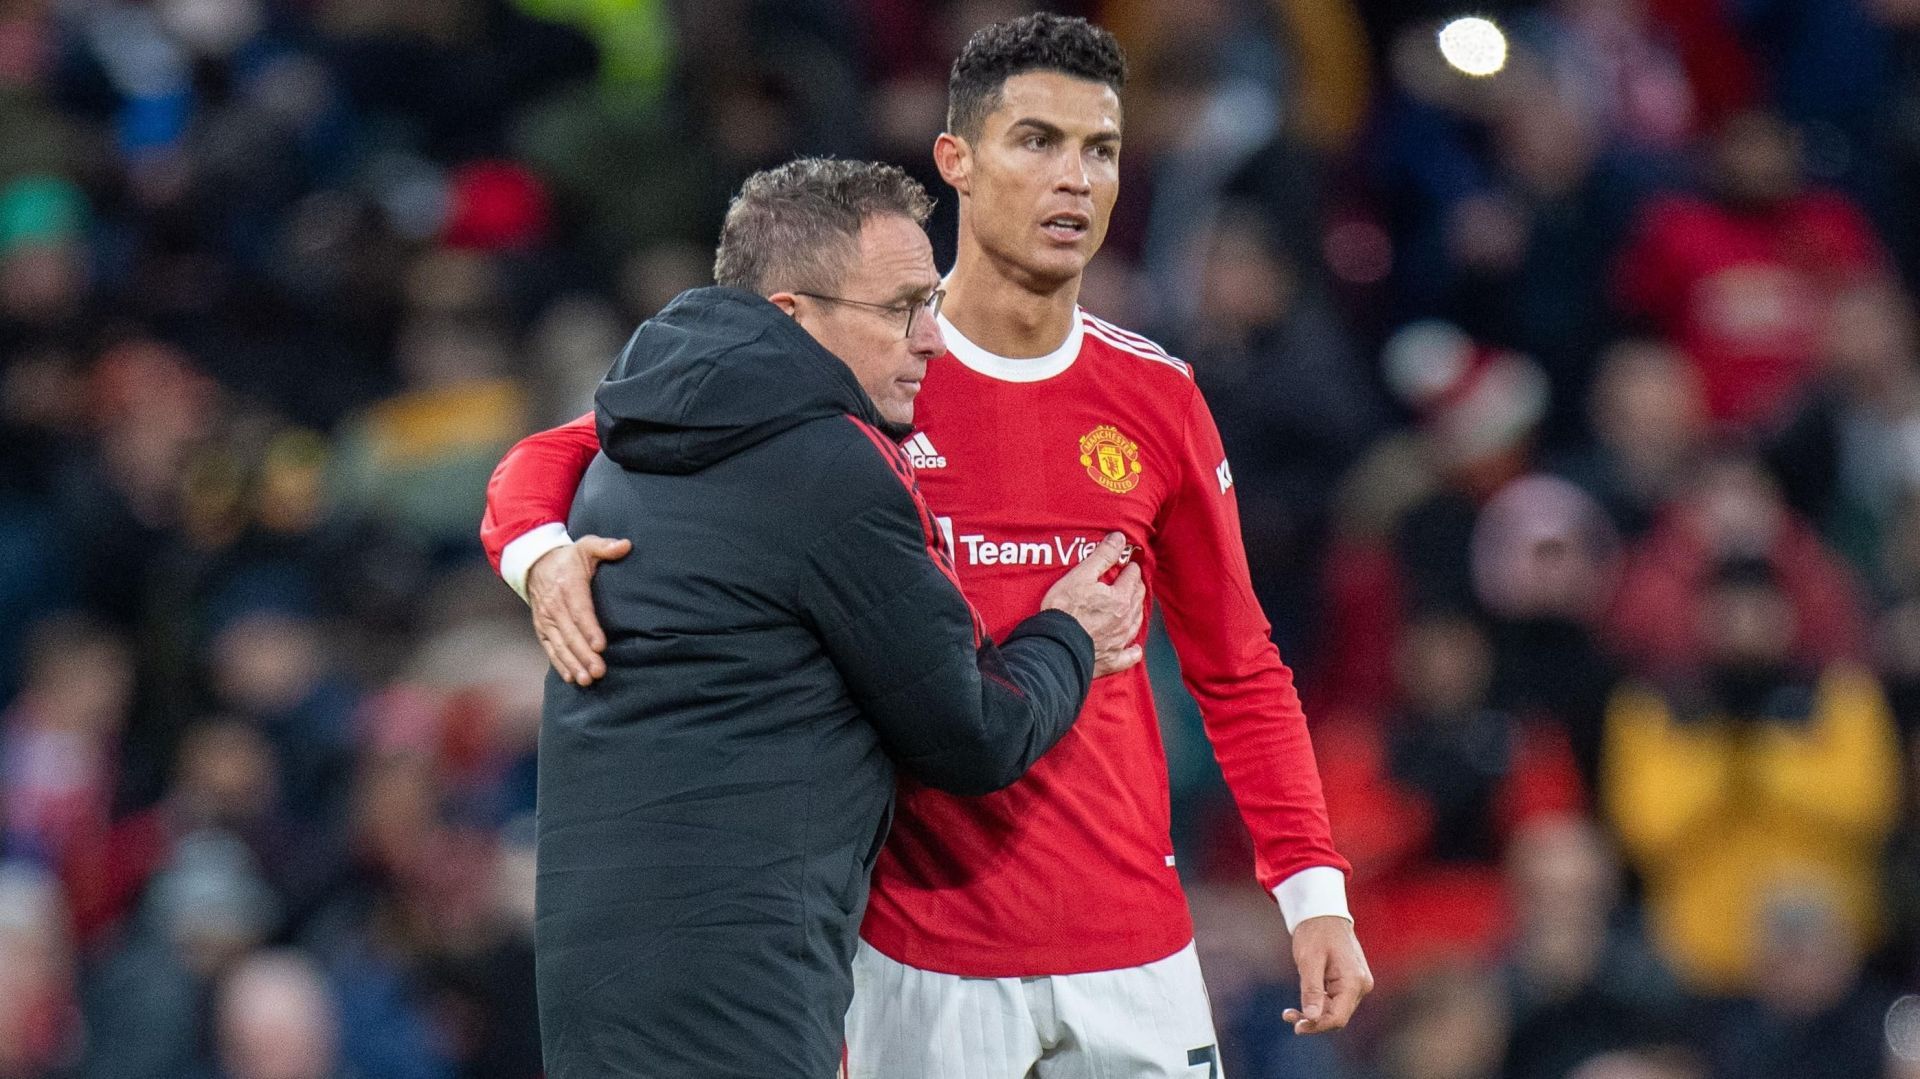 Manchester United manager Ralf Rangnick and Cristiano Ronaldo (Pic cred: The Times)